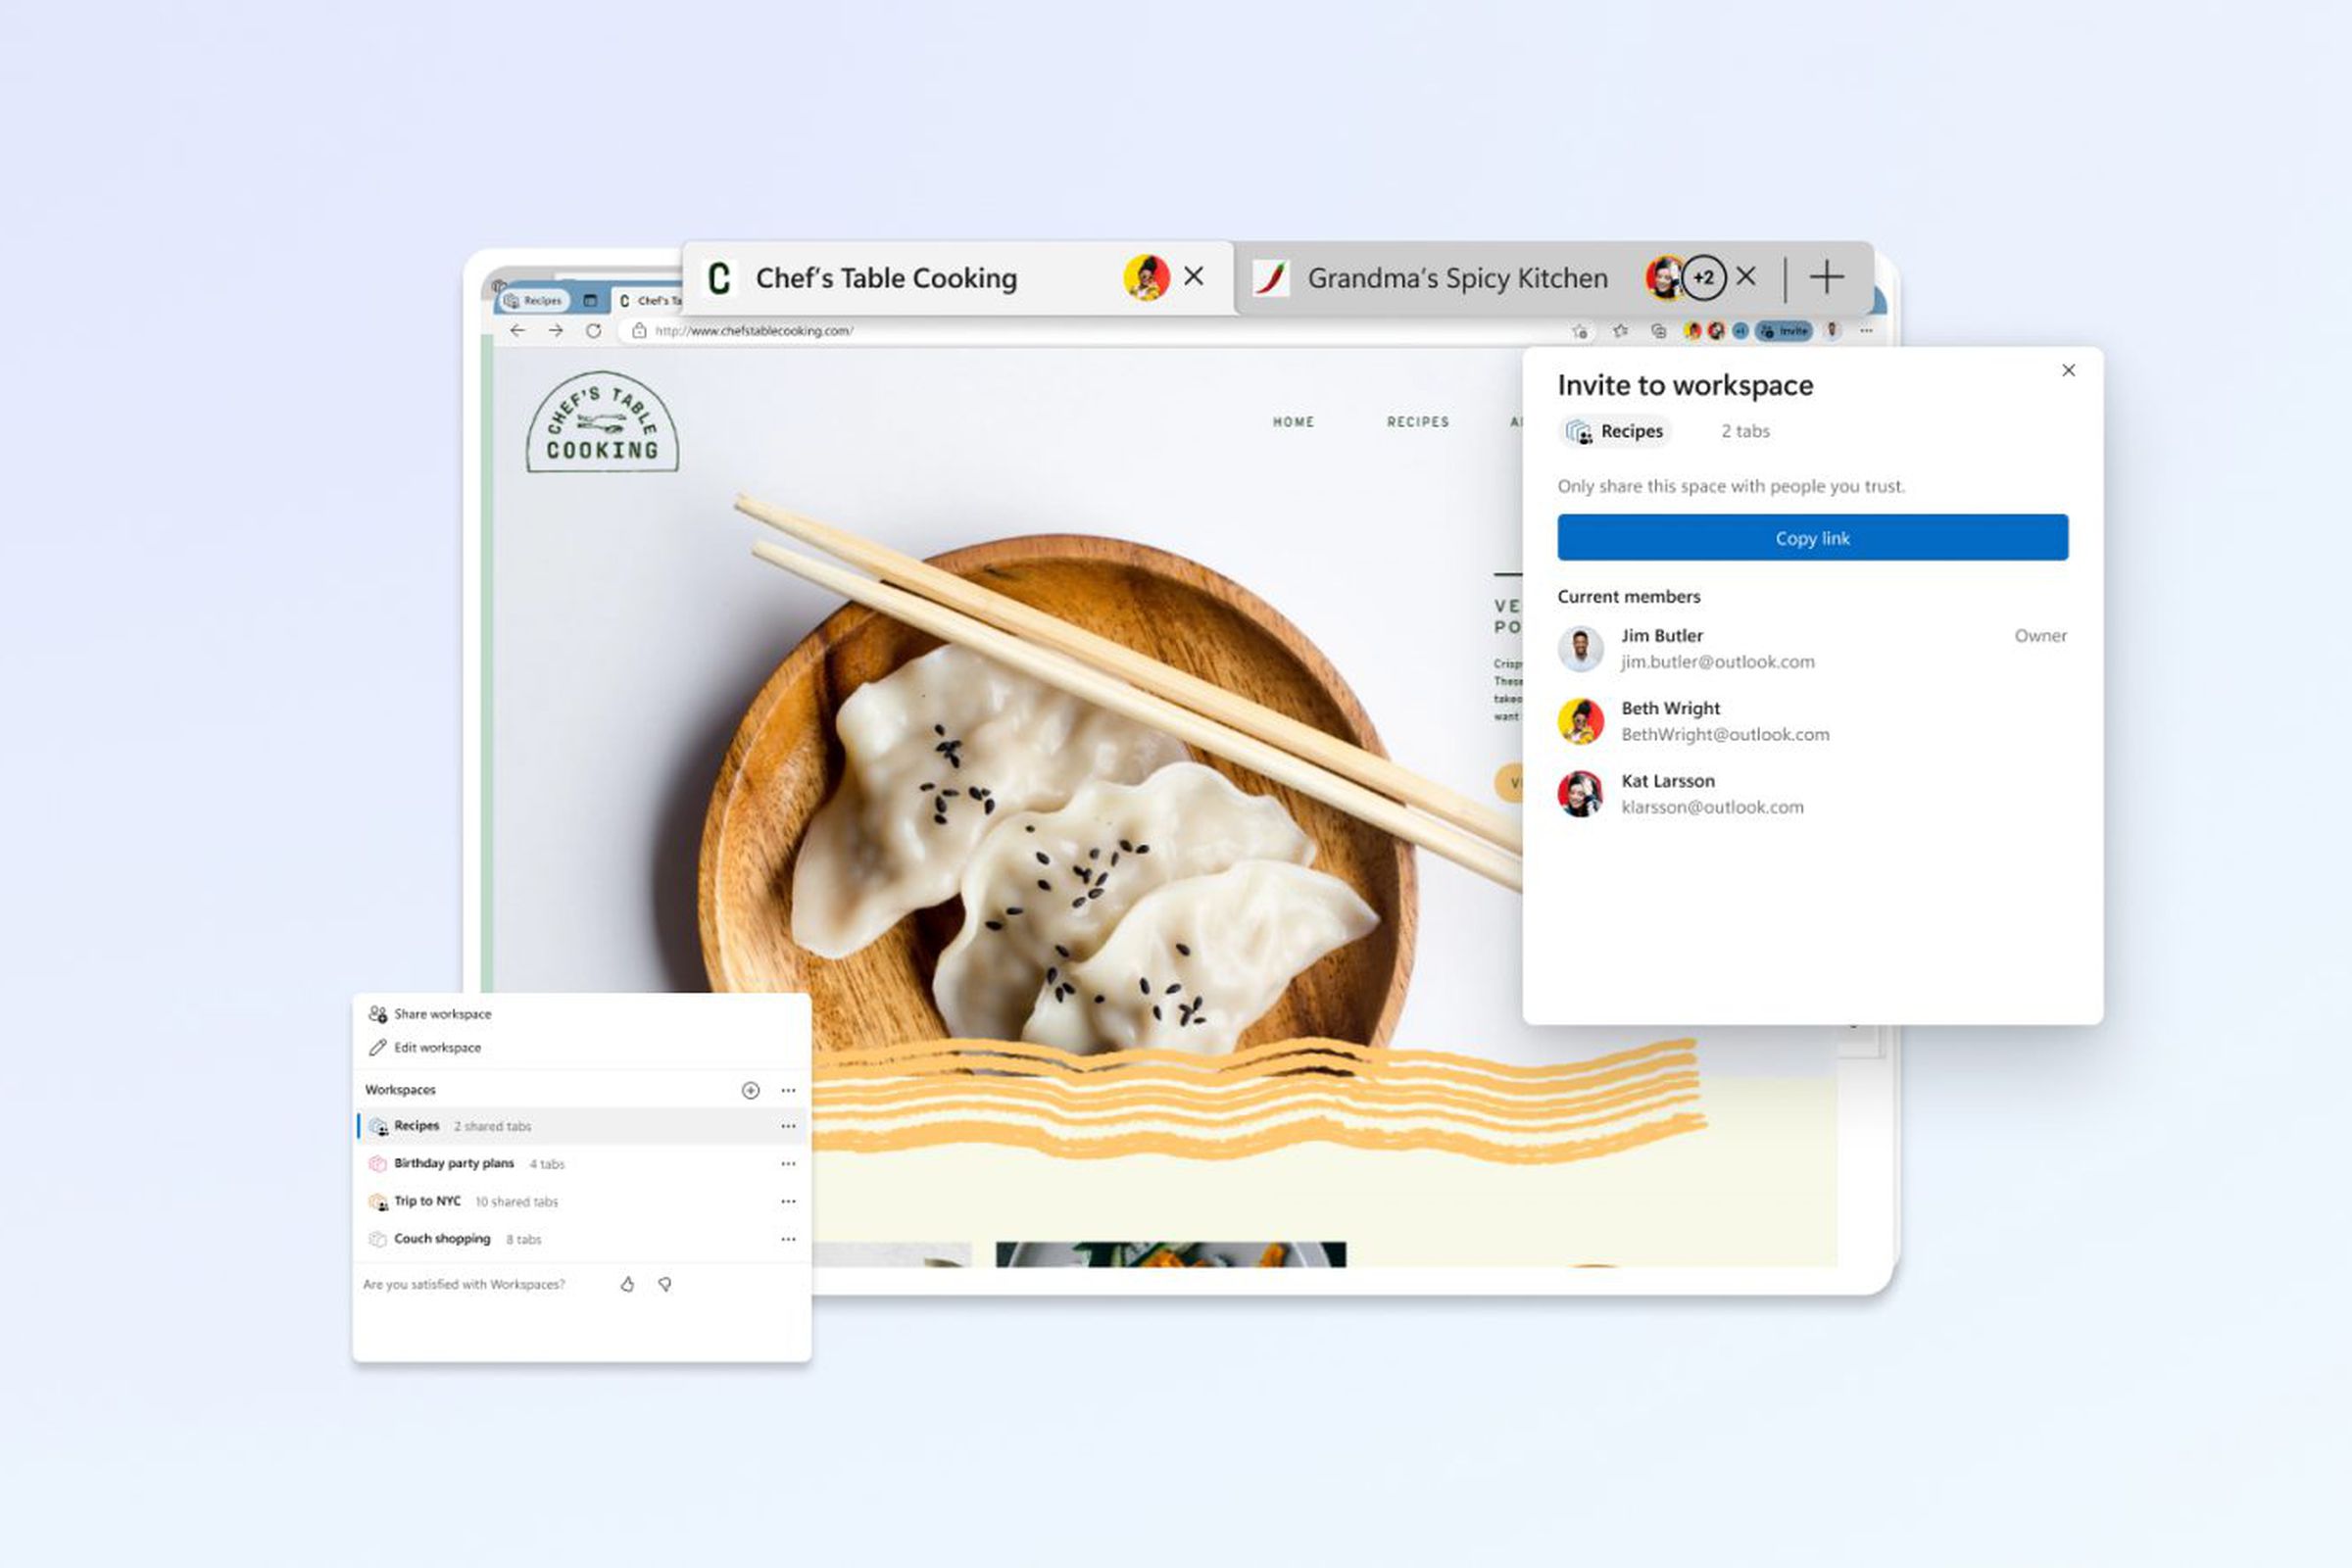 An image showing Microsoft Edge’s Workspaces feature